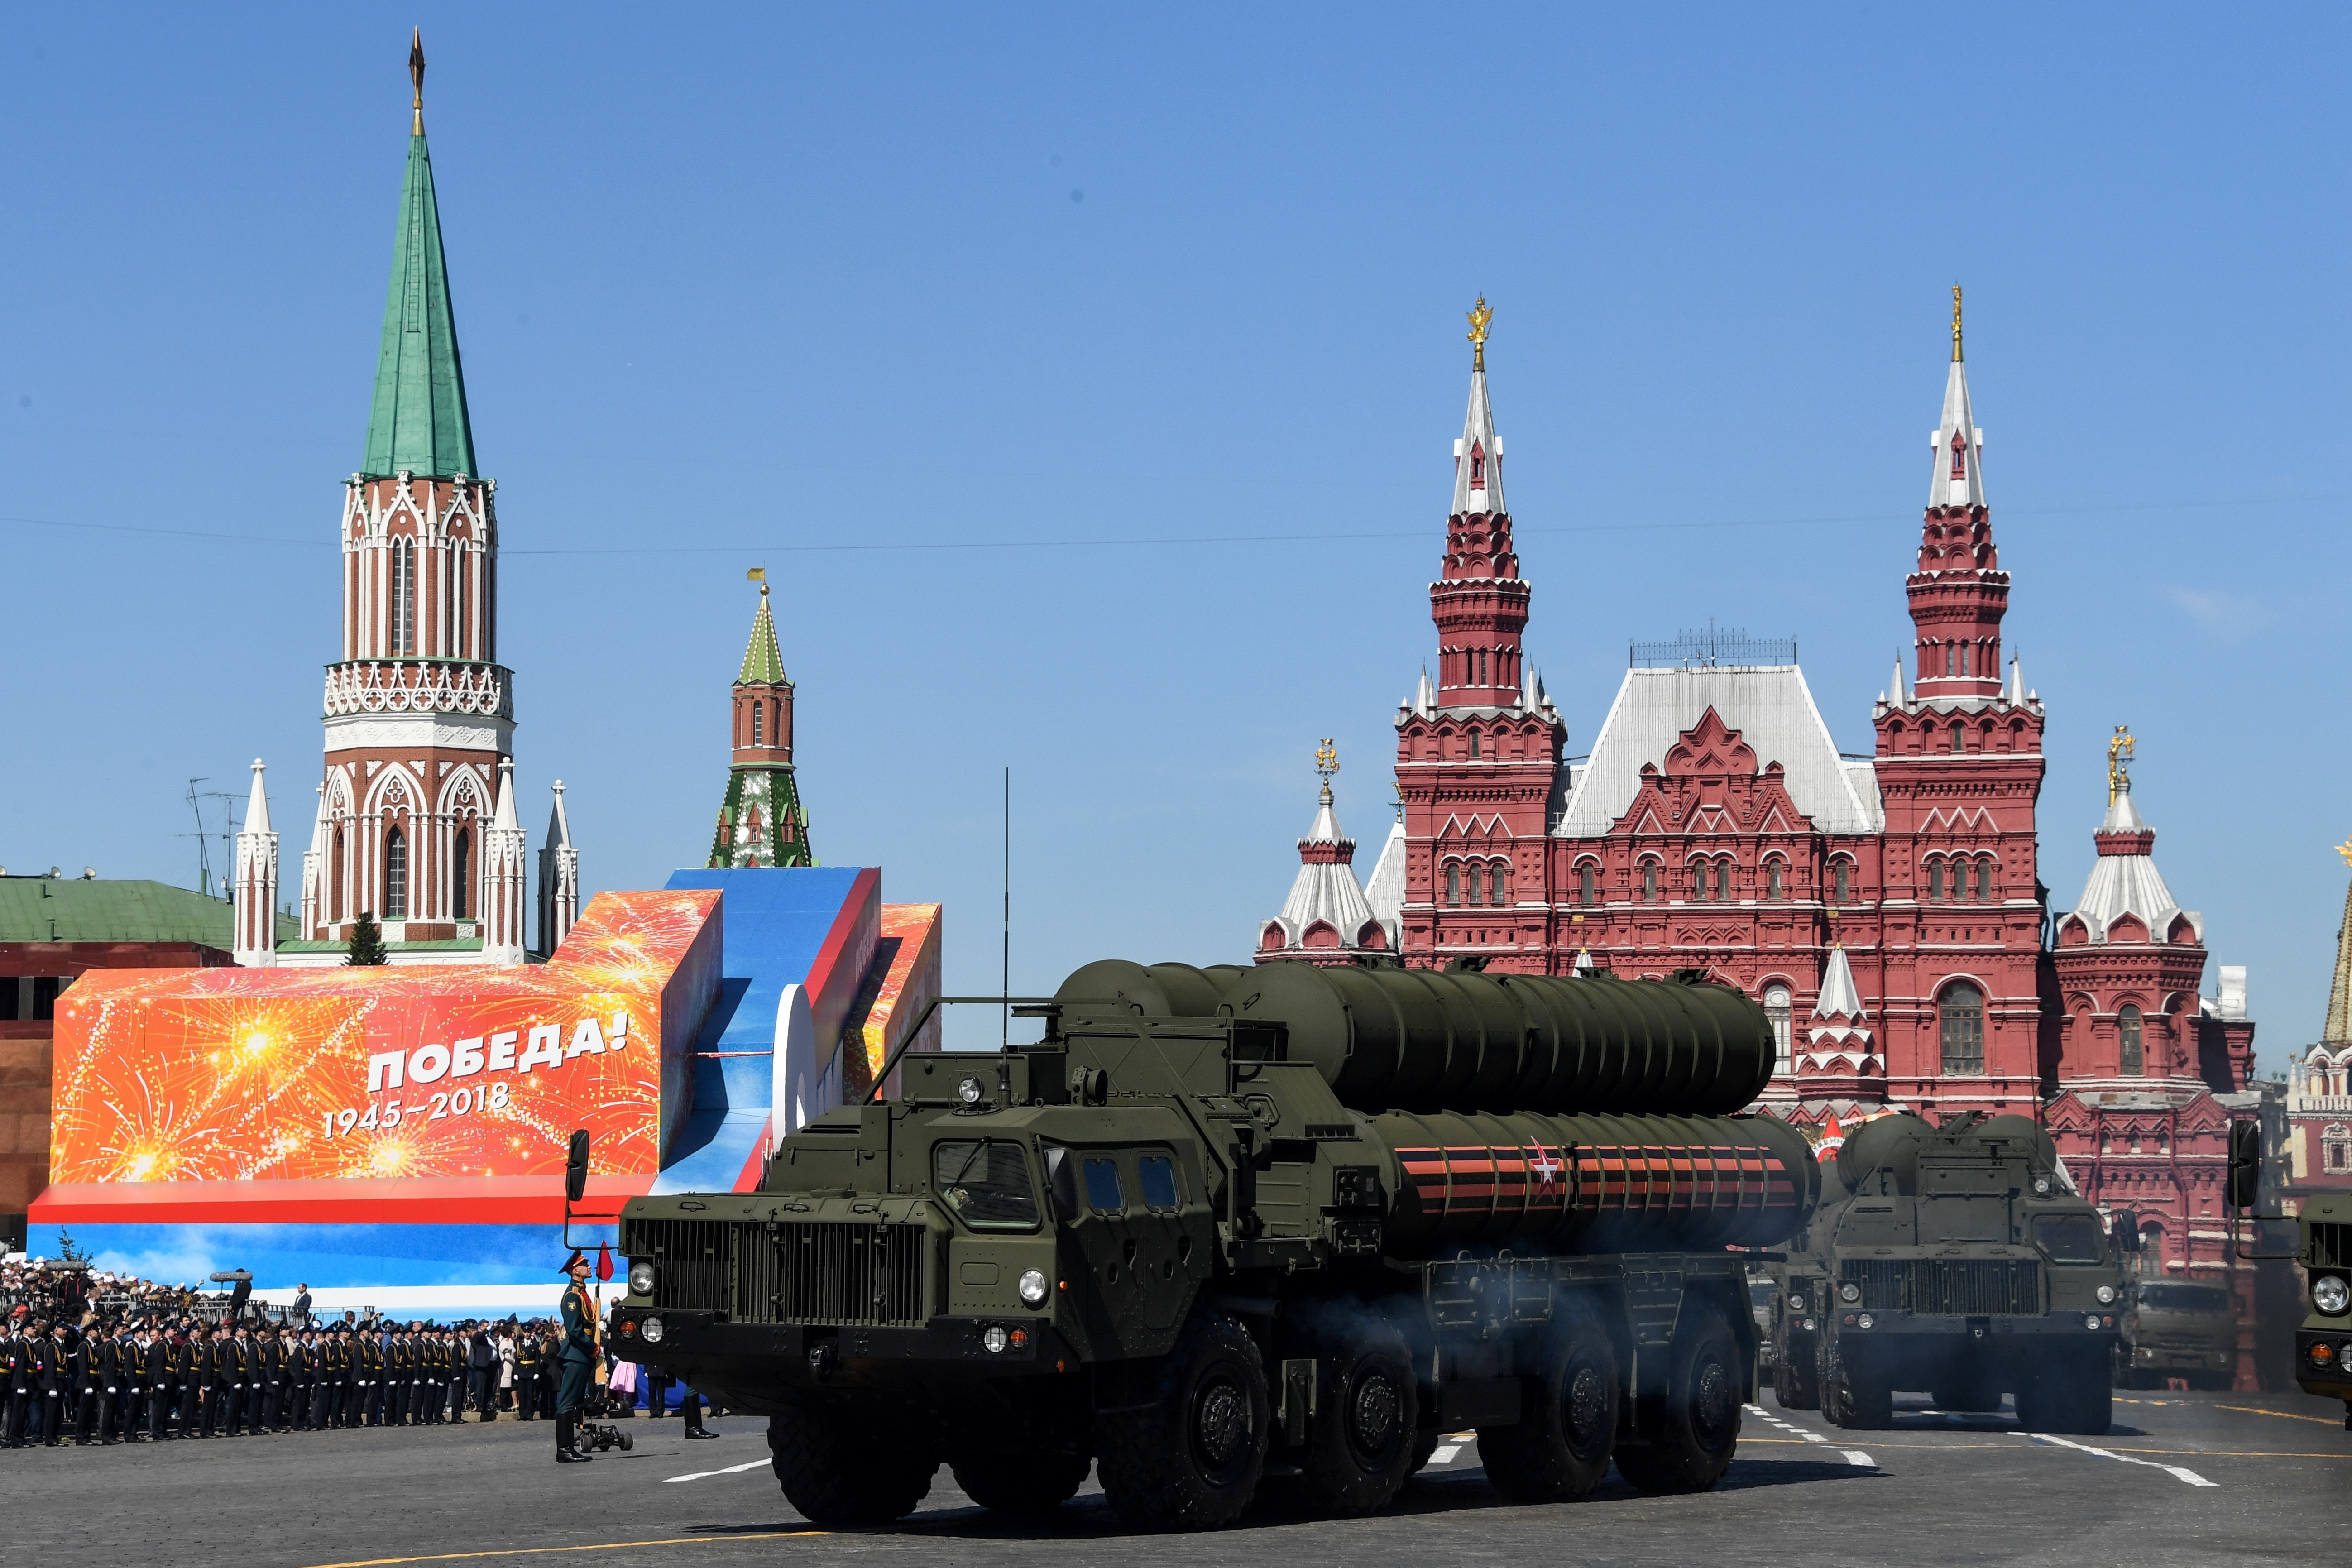 Russia has more than 100 products on display at this year’s Airshow China, including the S-400 Triumph air defence missile system seen here on parade in Moscow in May. Photo: AFP